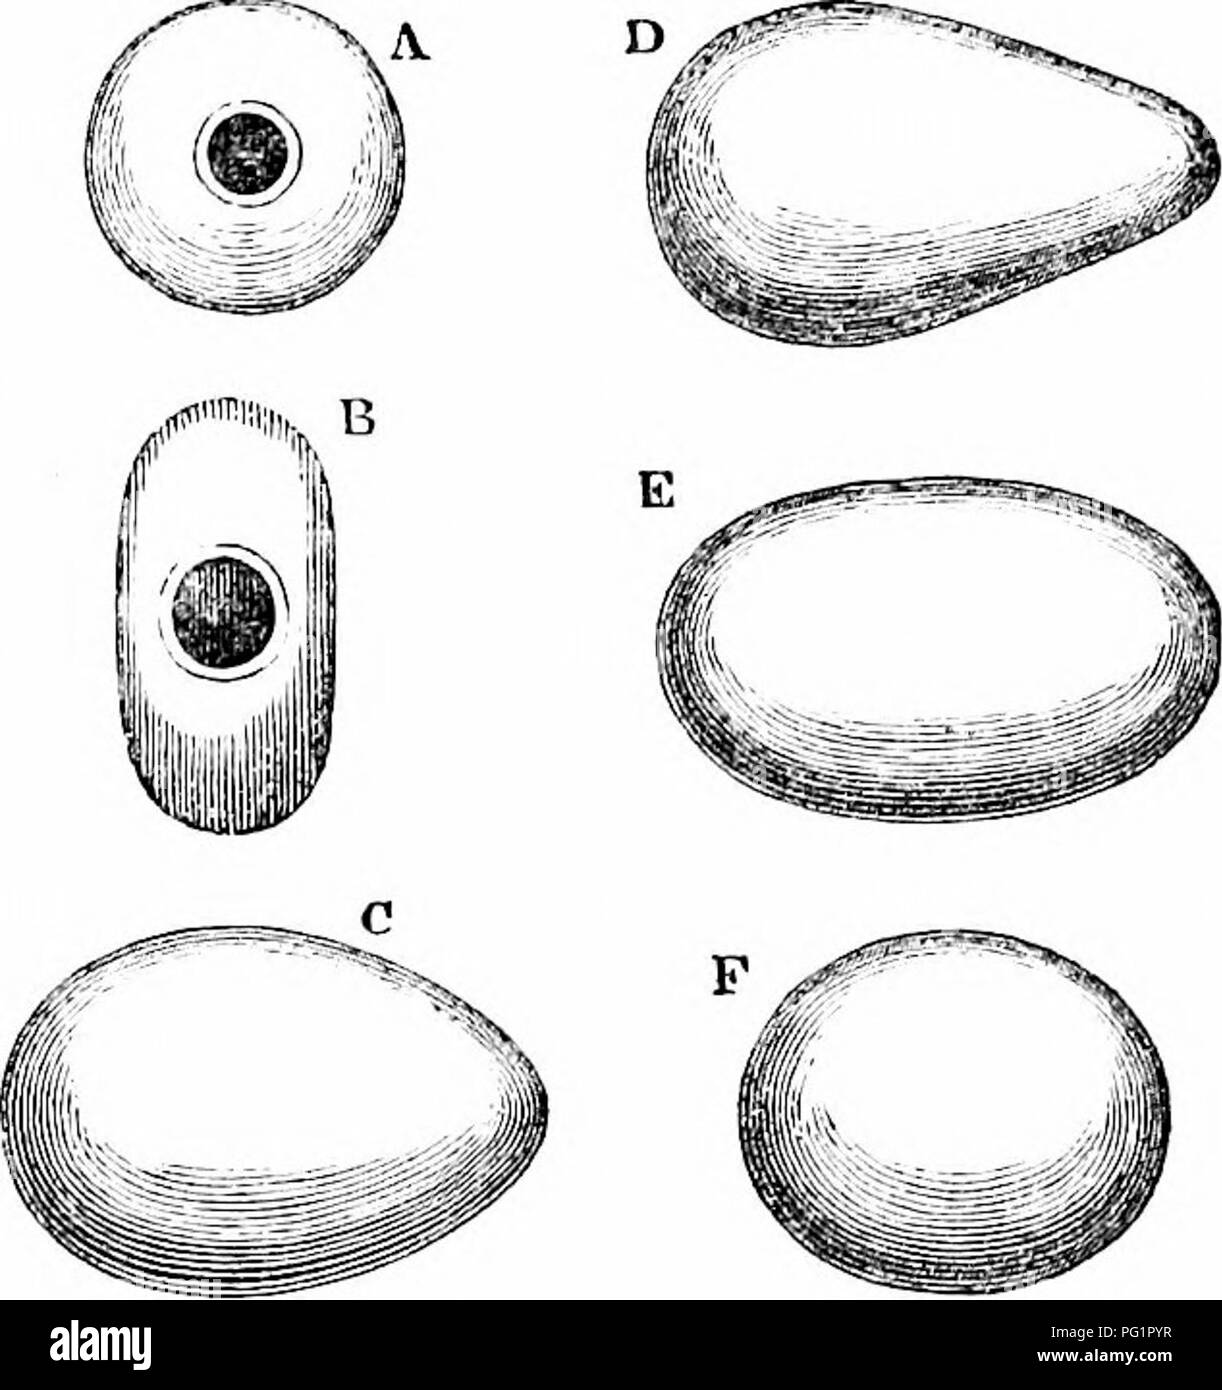 . On the anatomy of vertebrates. Vertebrates; Anatomy, Comparative; 1866. FECUNDATION IN FISHES. 5!j9 420. The structure and foi-mation of the ovum in scaled and scuted Reptiles are essentially the same as in the cartilaginous Fishes. Tlie germ-cell, with a single nucleus, is first formed in a delicate OA'isac imbedded in the stroma of a solid ovarium. A yolk of large size is added, of which the greater jDart consists of large non-nucleated oil-vesi- cles, and the smaller part of the vitelline granules and cells with a granulated nu- cleus ; these originally sur- round the germ-cell, then indi Stock Photo